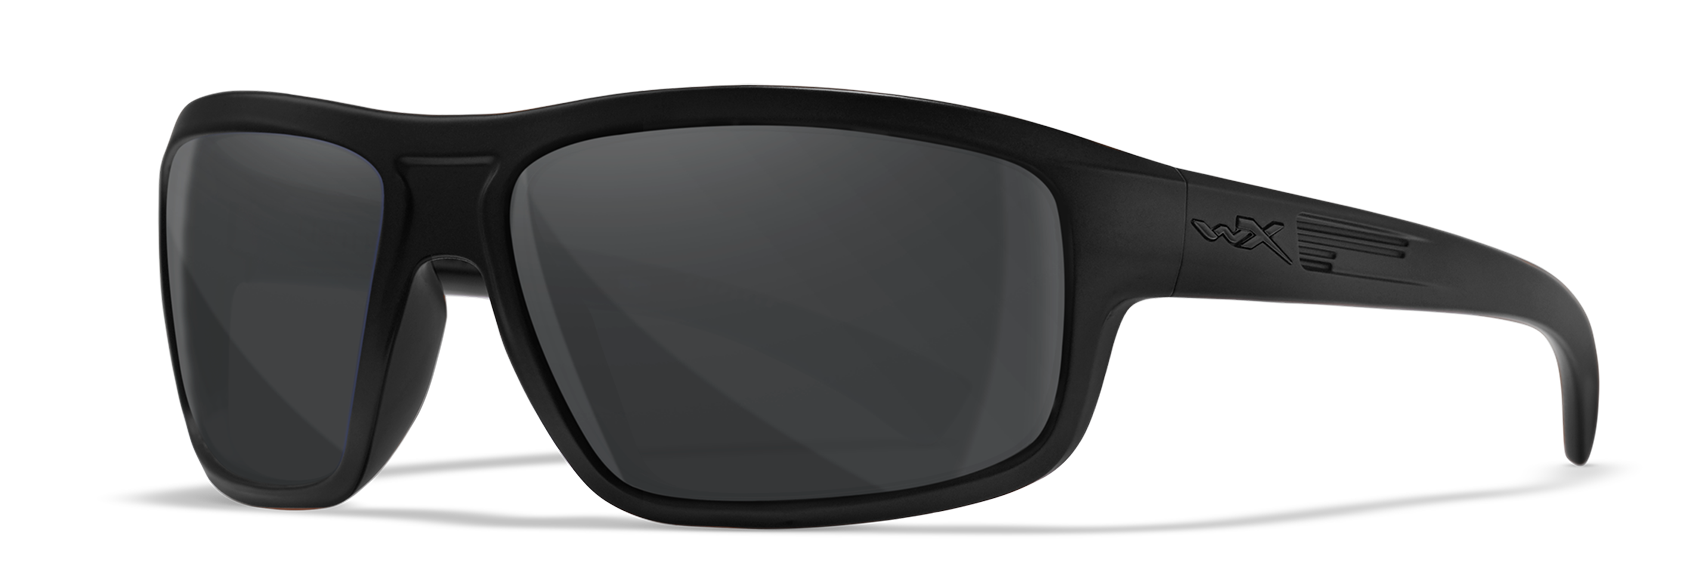 Wiley X WX CONTEND Oval Sunglasses  Matte Black 62-17-130